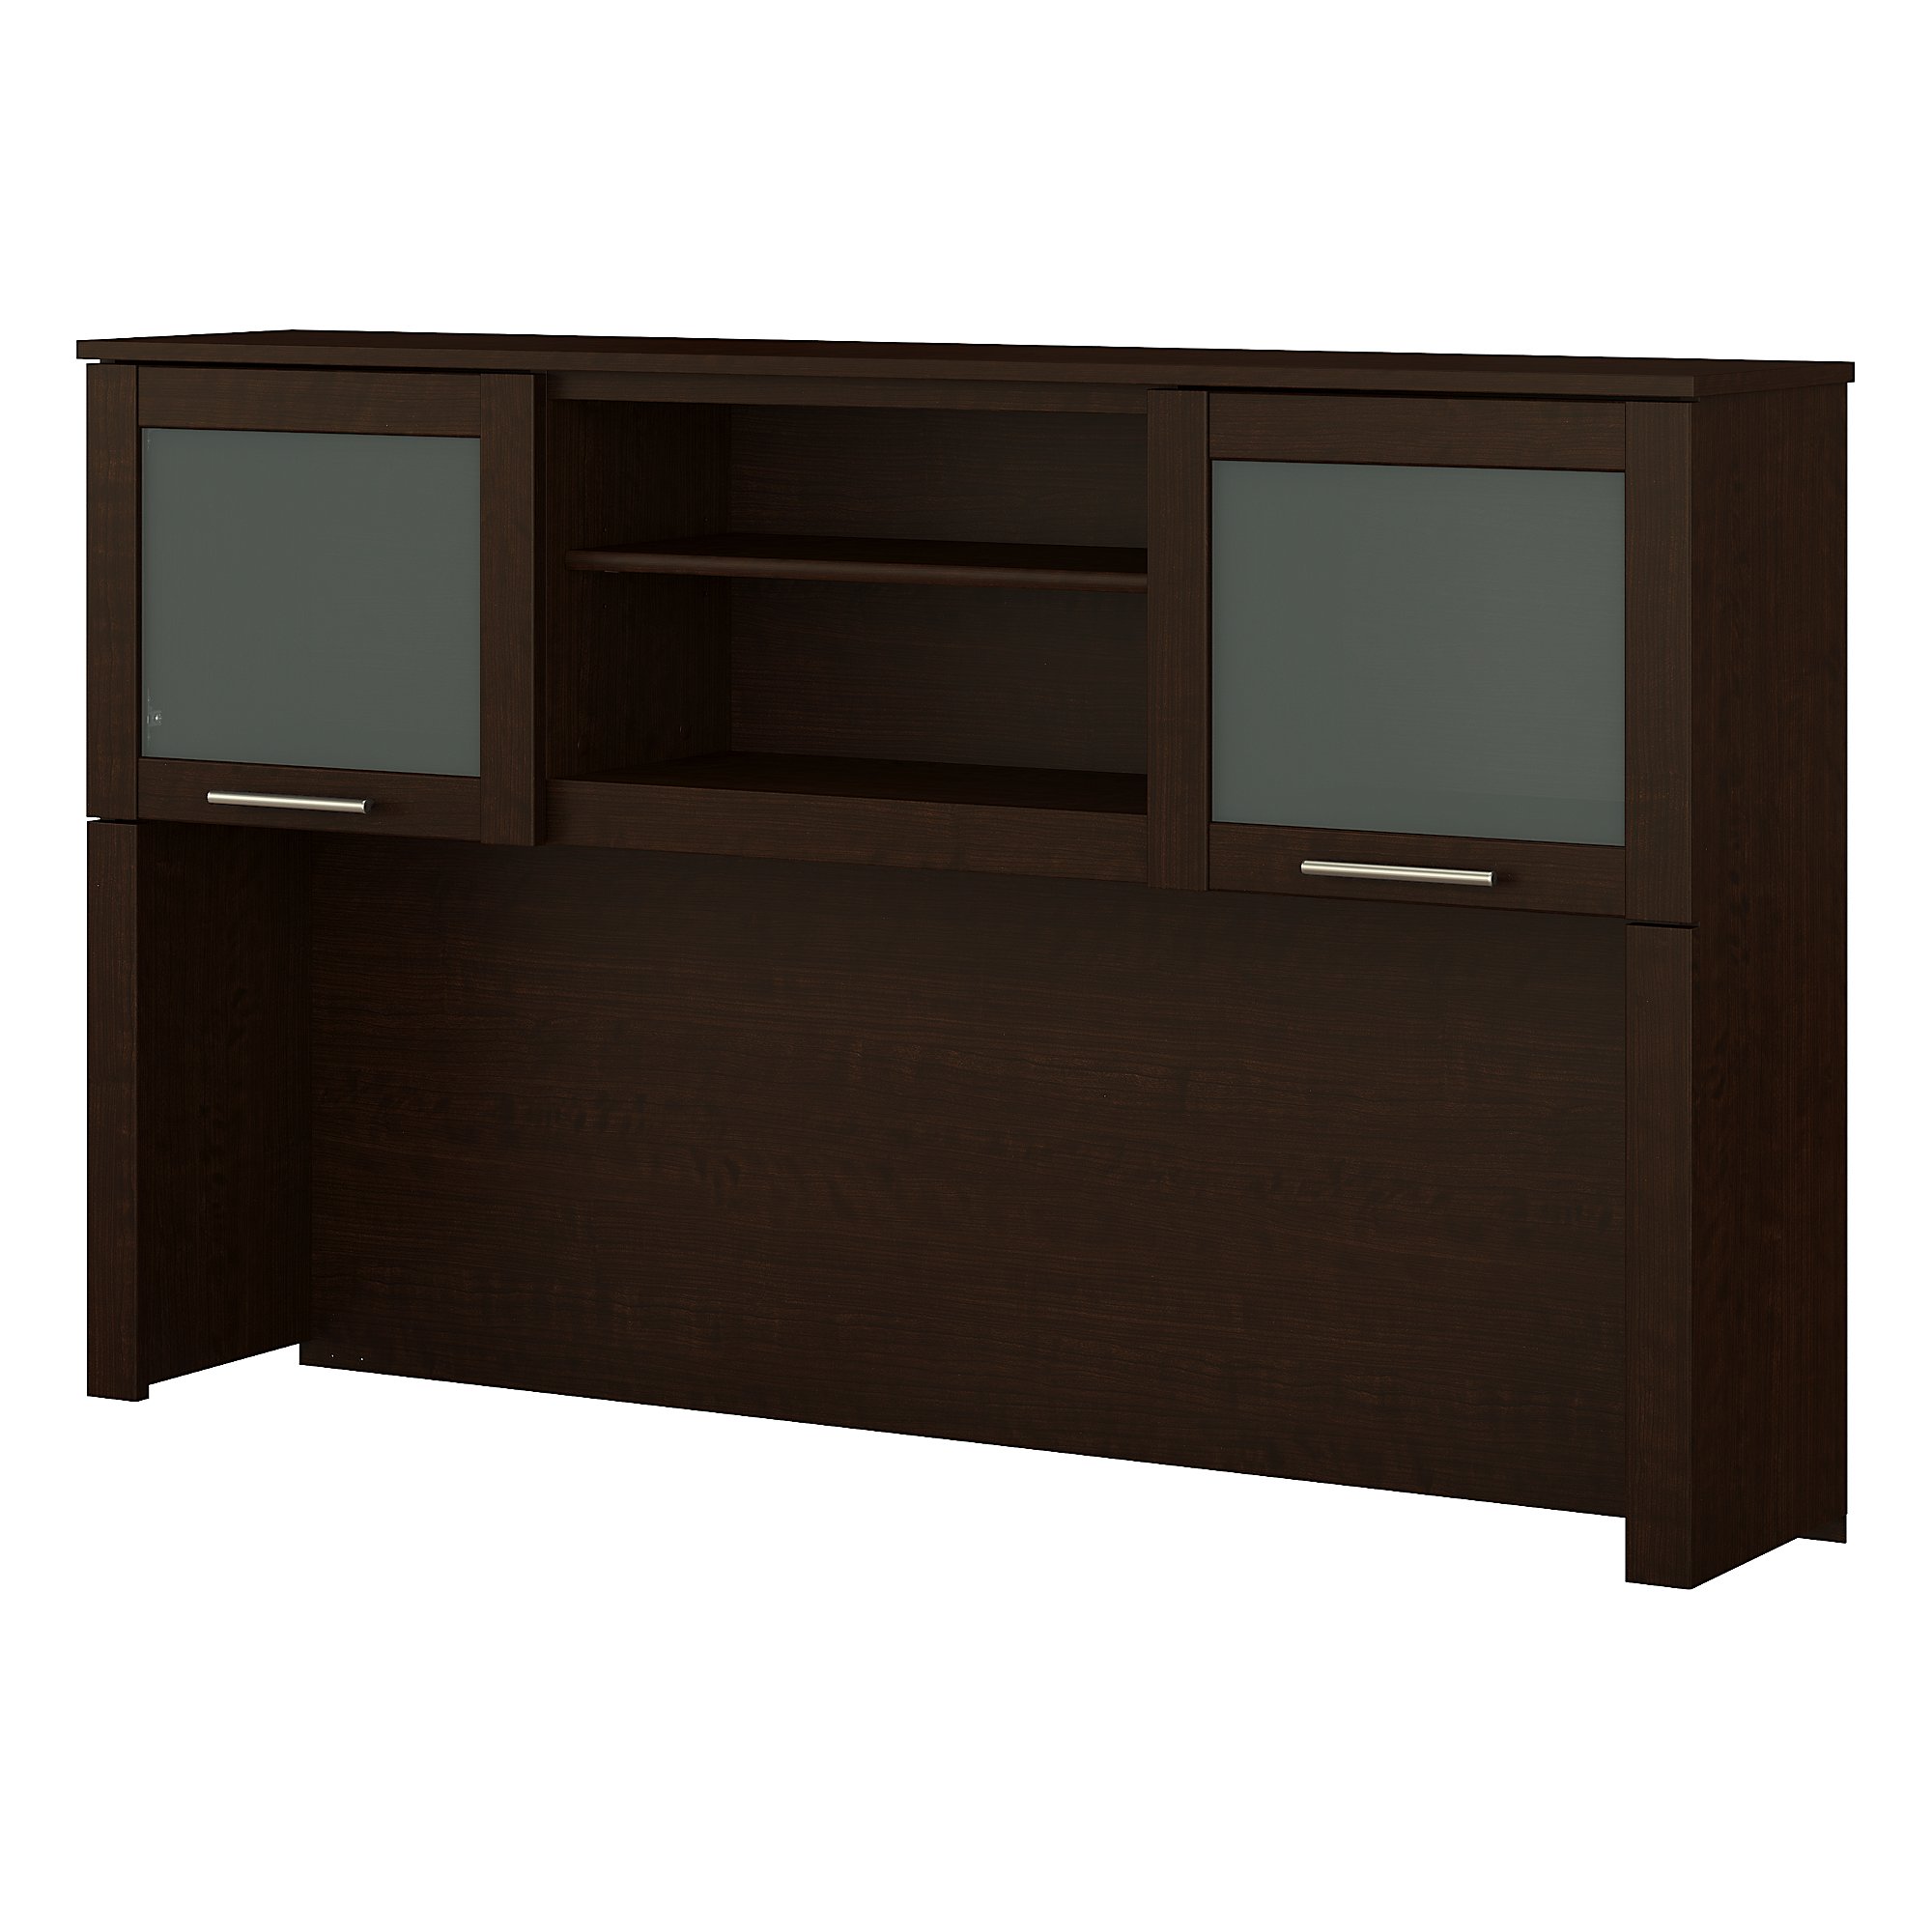 Bush Furniture Somerset 60 in 2-Door Hutch with Open Storage in Mocha Cherry - fits on Somerset 60 in L Desk (Sold Separately) - image 1 of 4